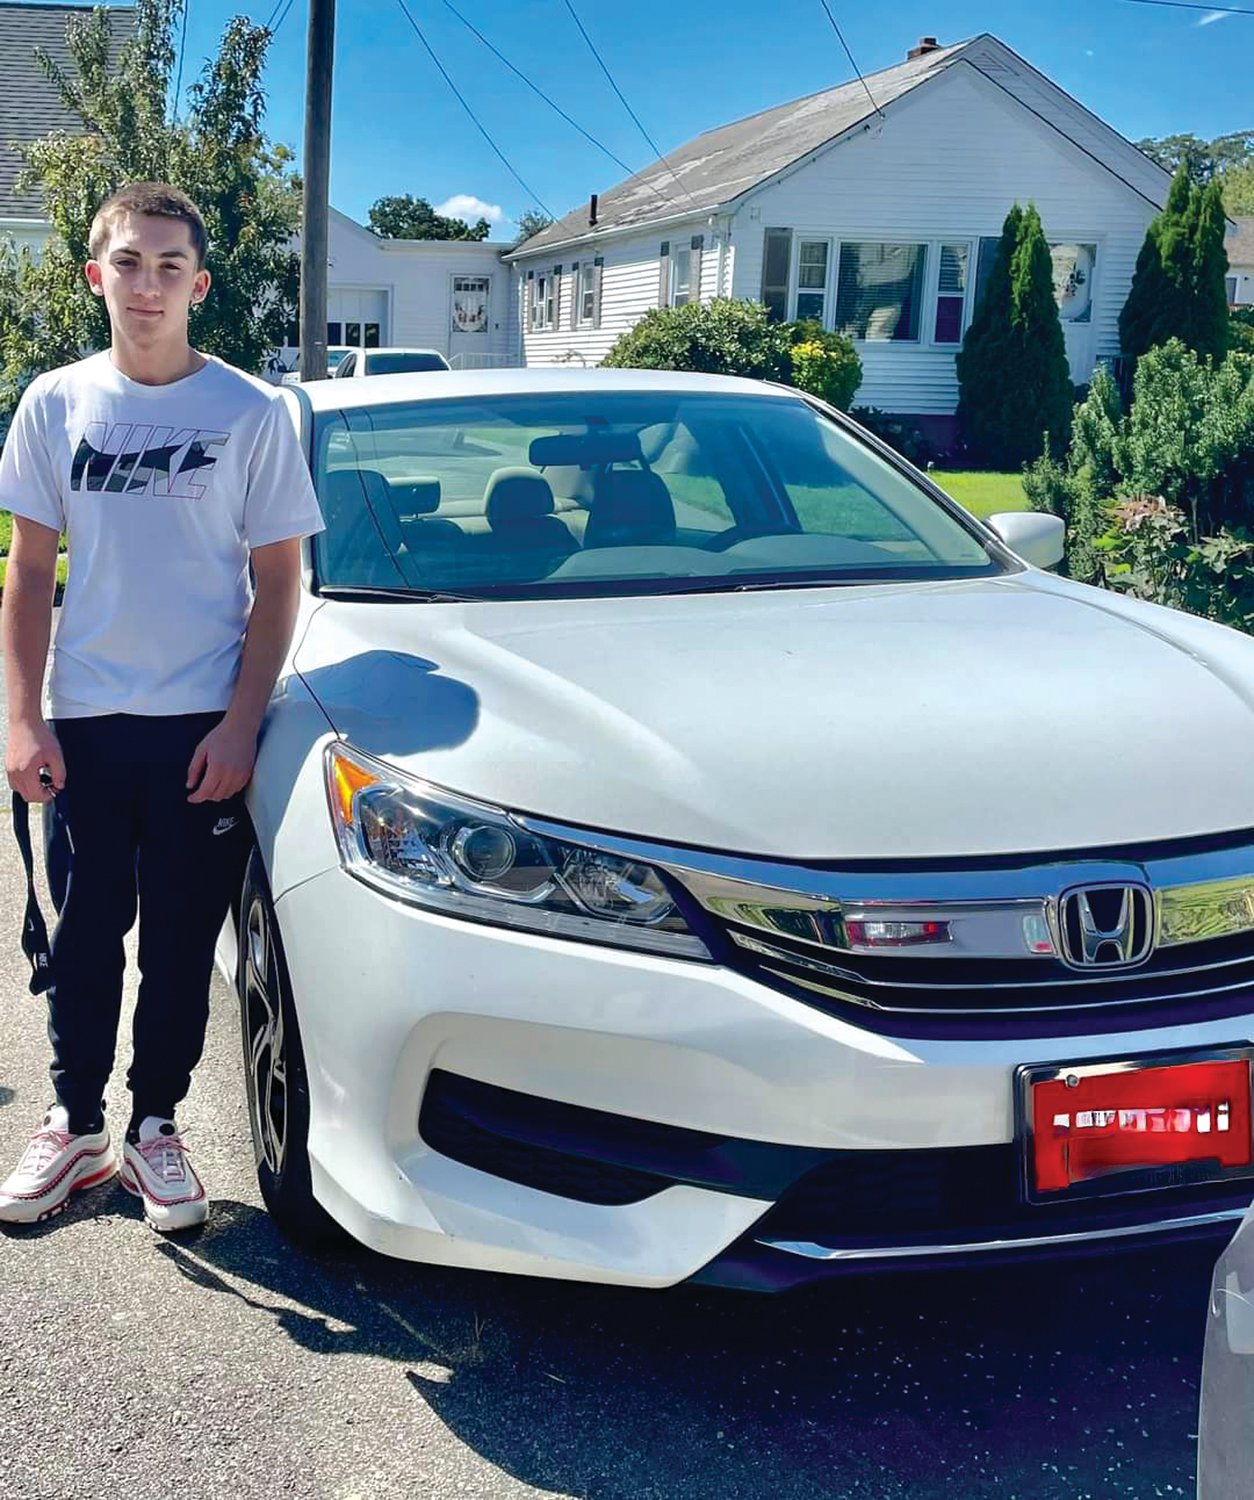 WITH HONDA: Sean poses with the 2020 Honda Accord he
purchased by working part-time as a culinary aide at the St.
Elizabeth Home in East Greenwich. (Courtesy of Gina Clapprood)